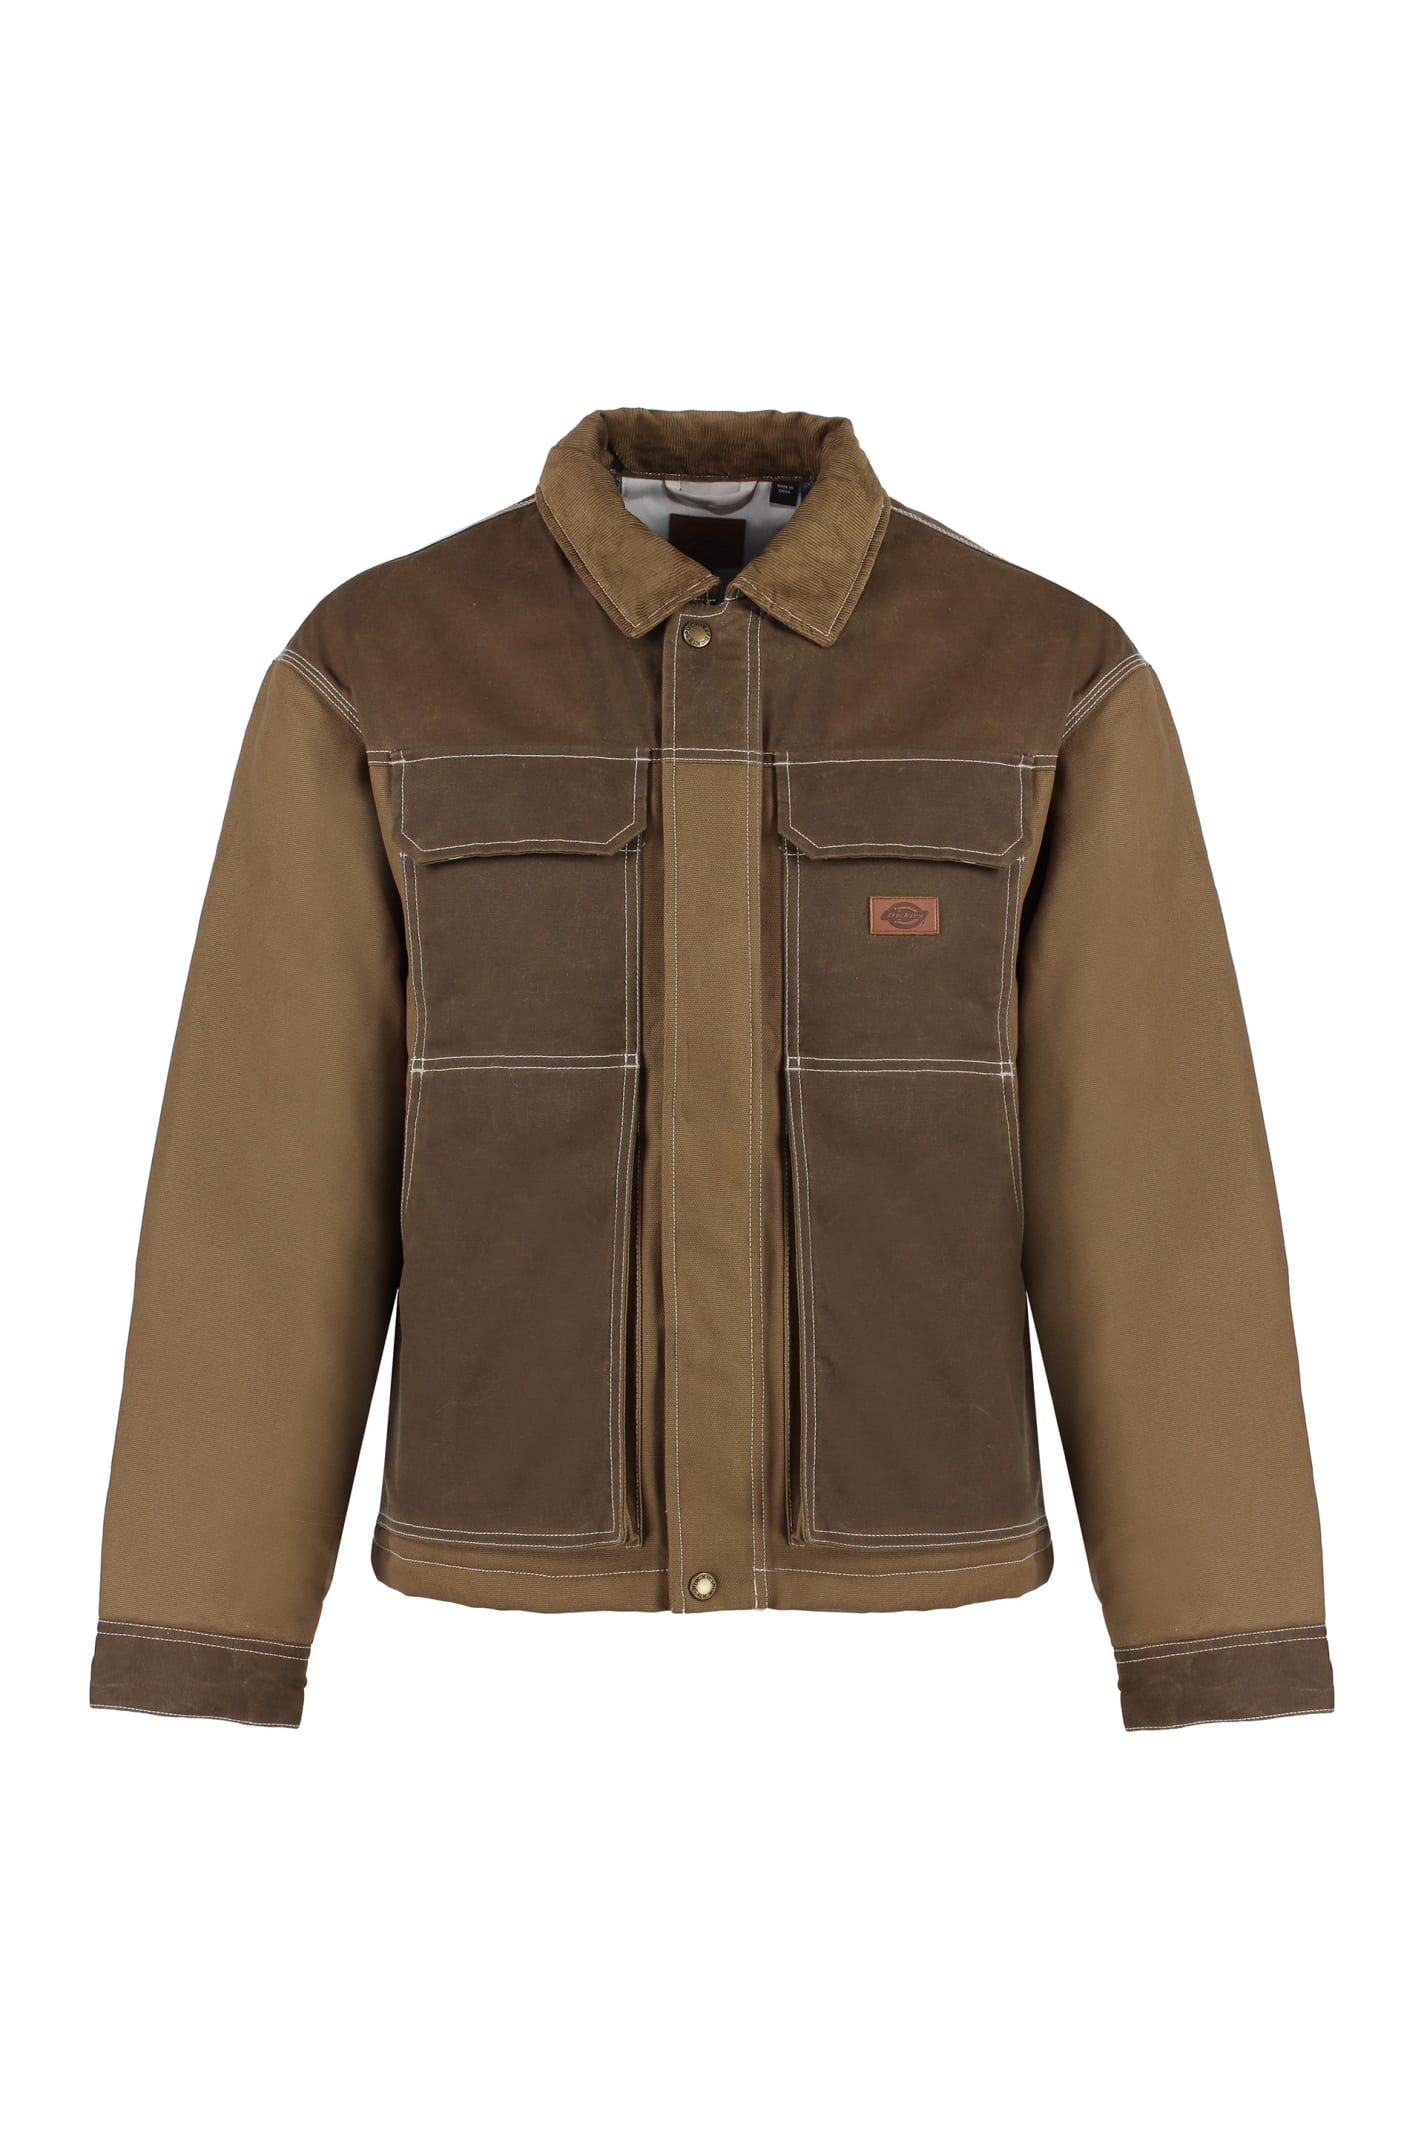 Dickies Lucas Waxed Cotton Jacket - brown - male - Size: Extra Large